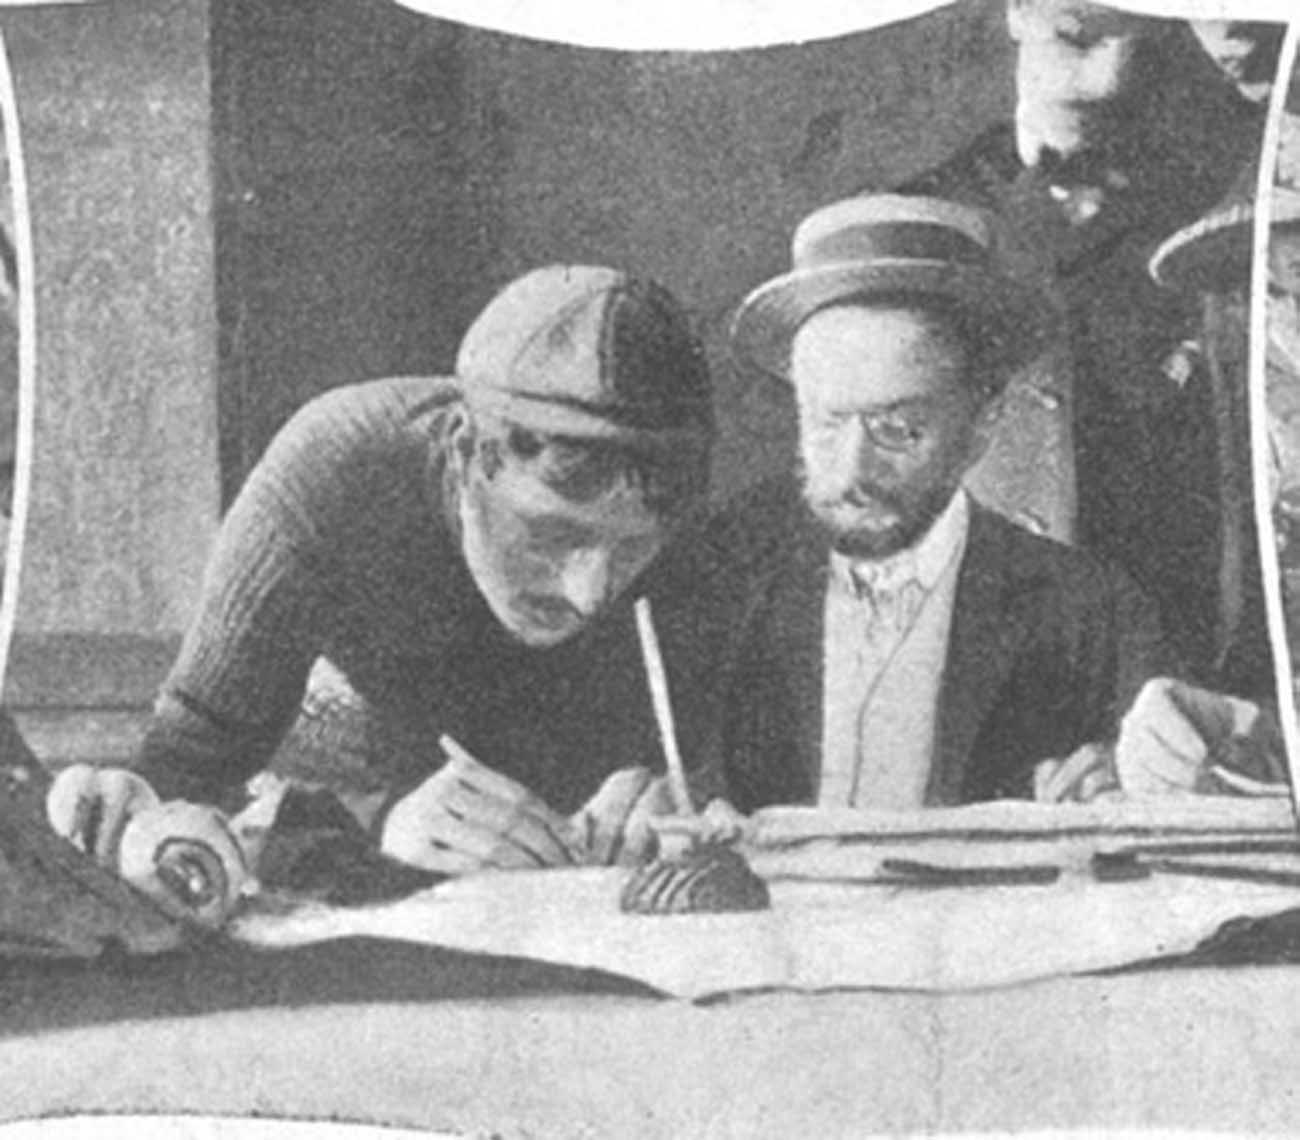 Leon Georget signs in under the watchful eye of an official.